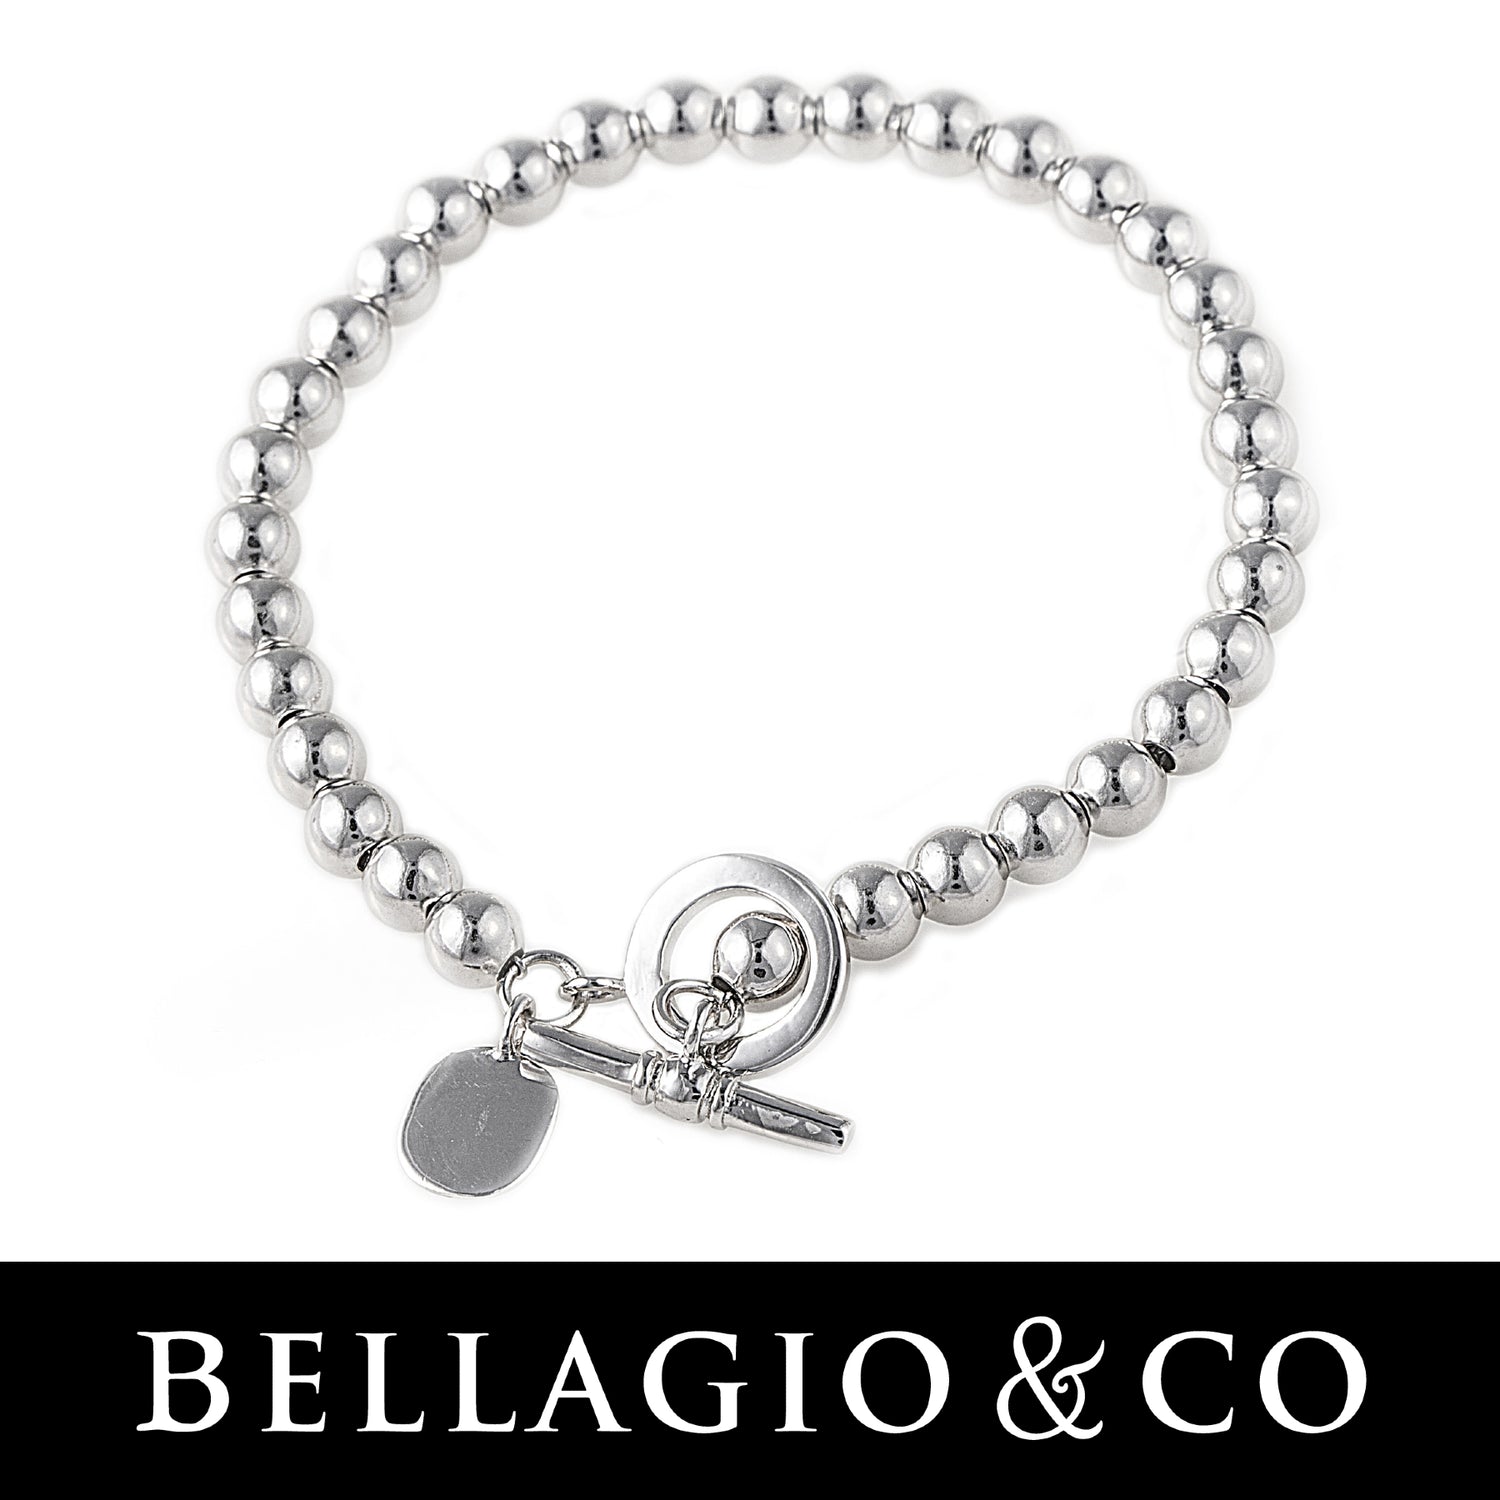 925 Sterling Silver Ball Jewellery by Bellagio & Co. Worldwide Shipping from Australia.